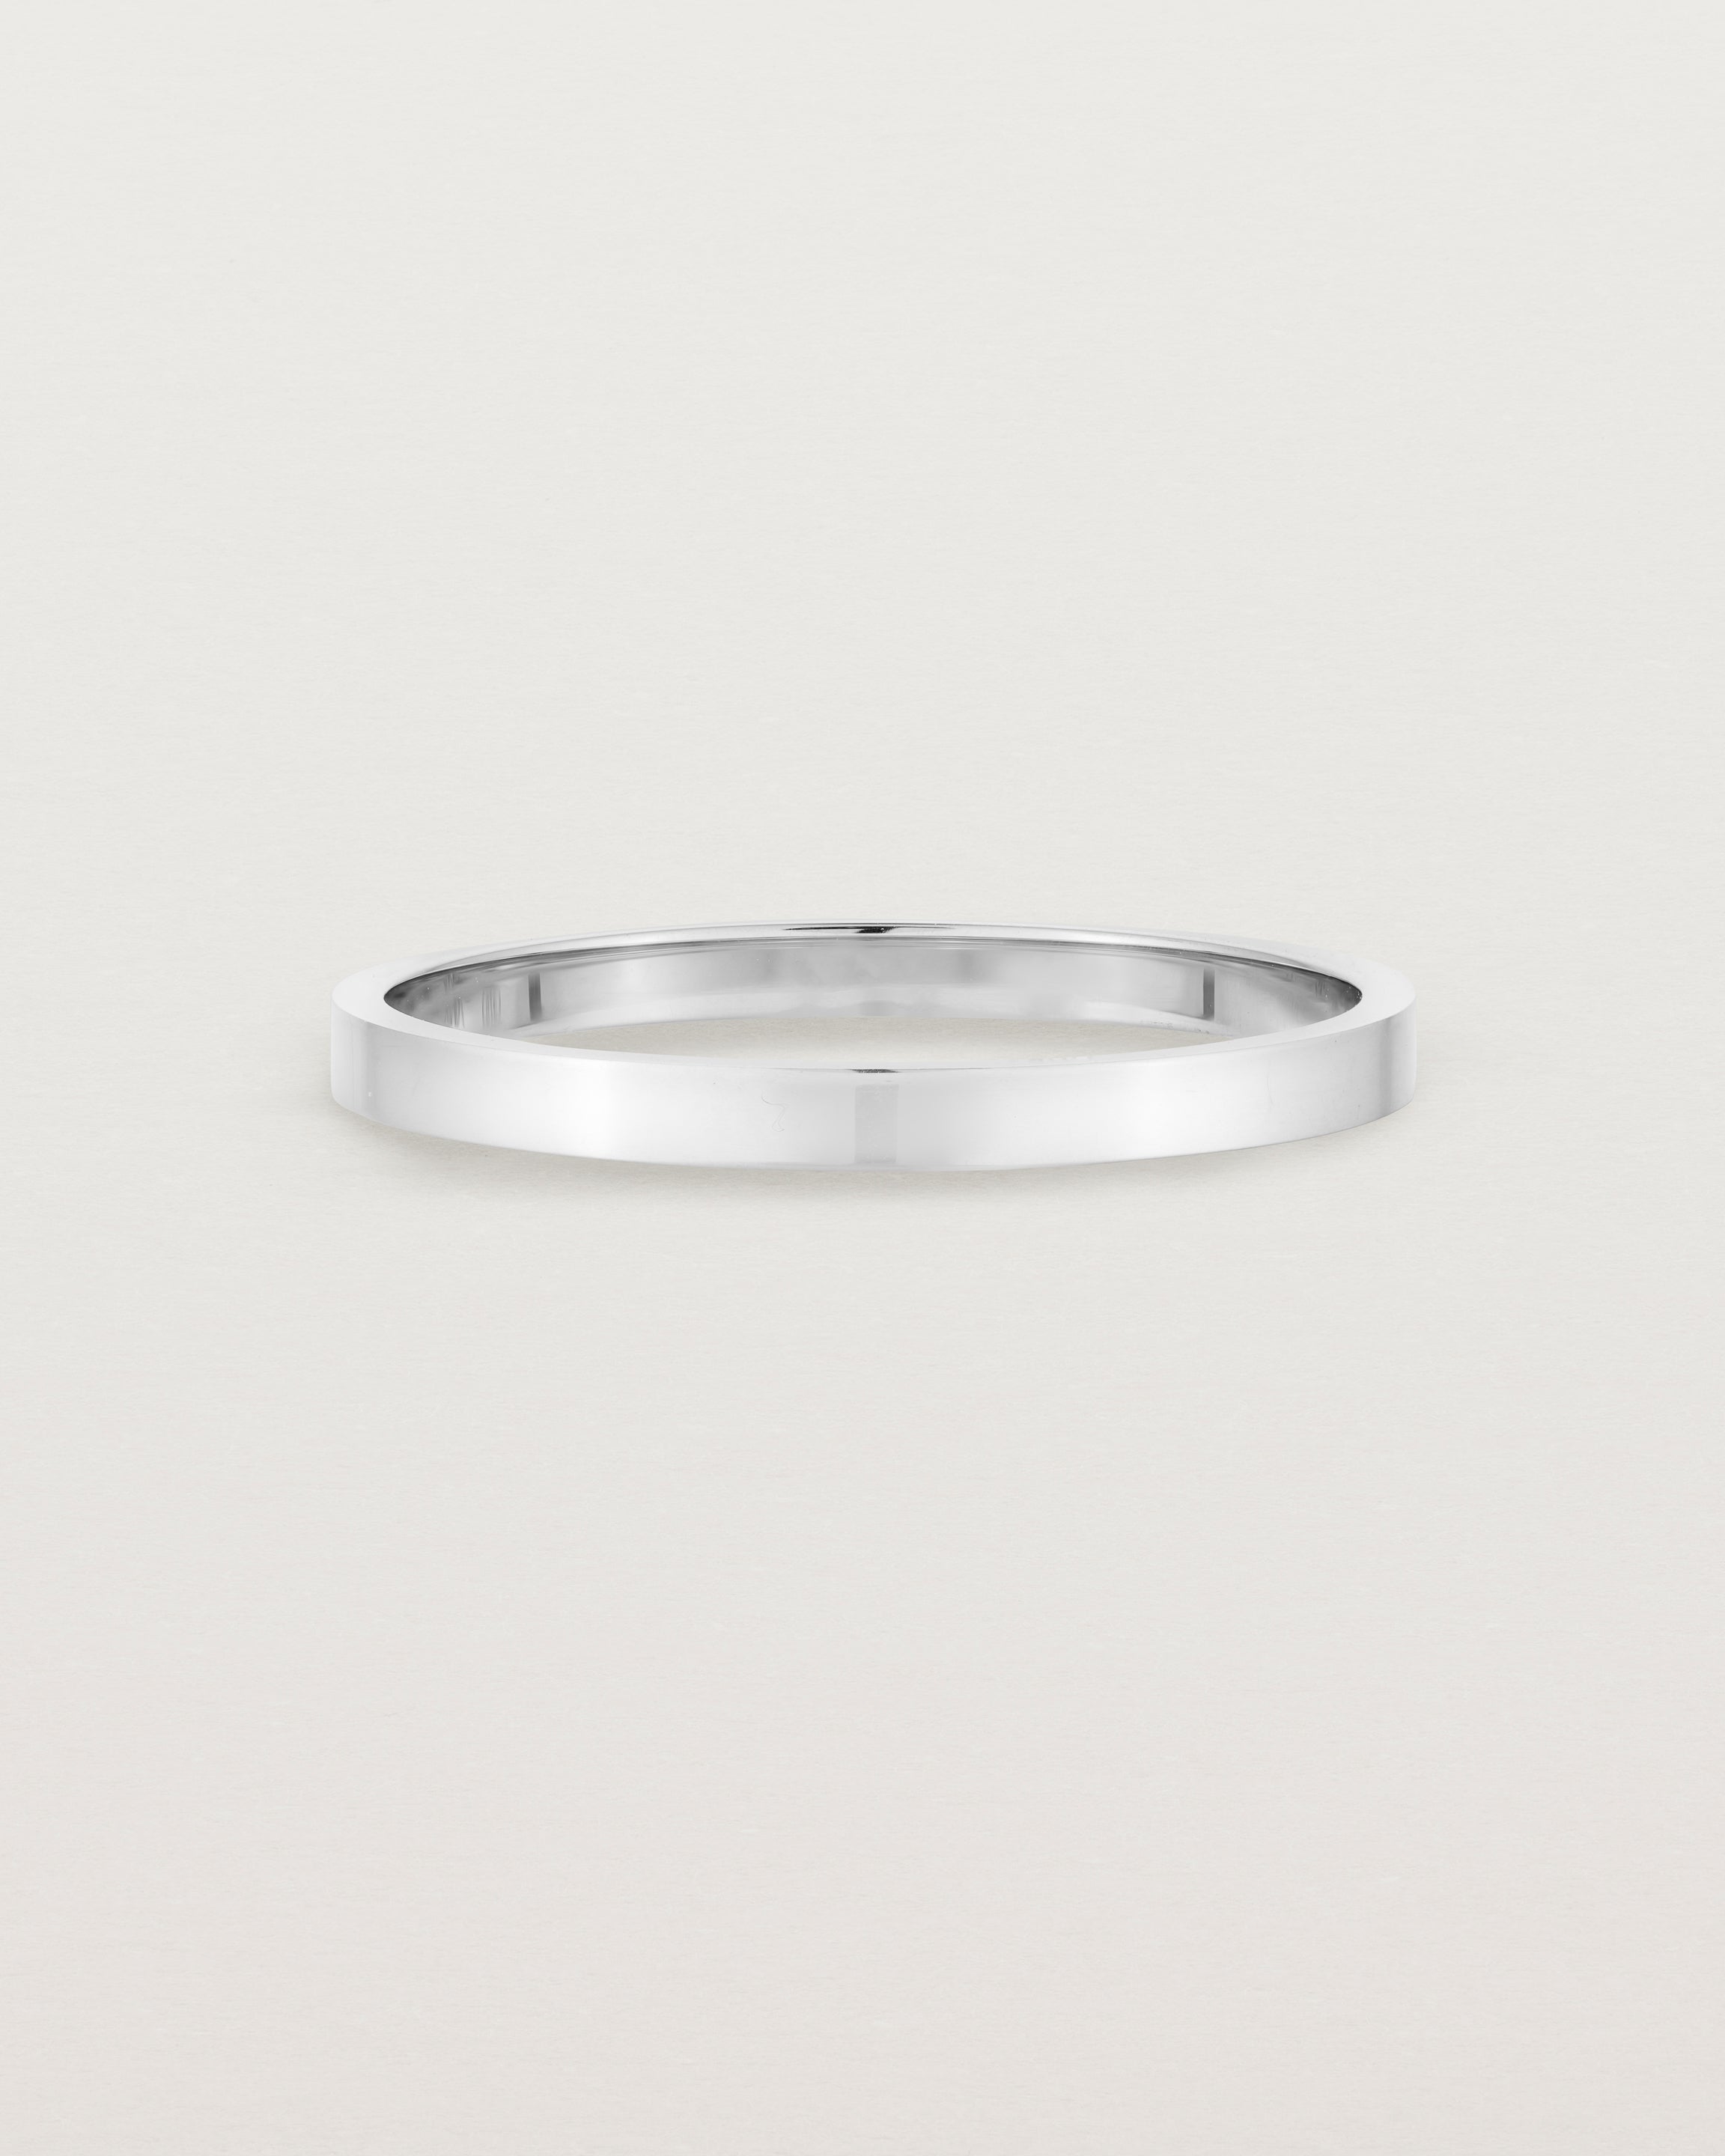 Our square profile, flat wedding band crafted in sterling silver